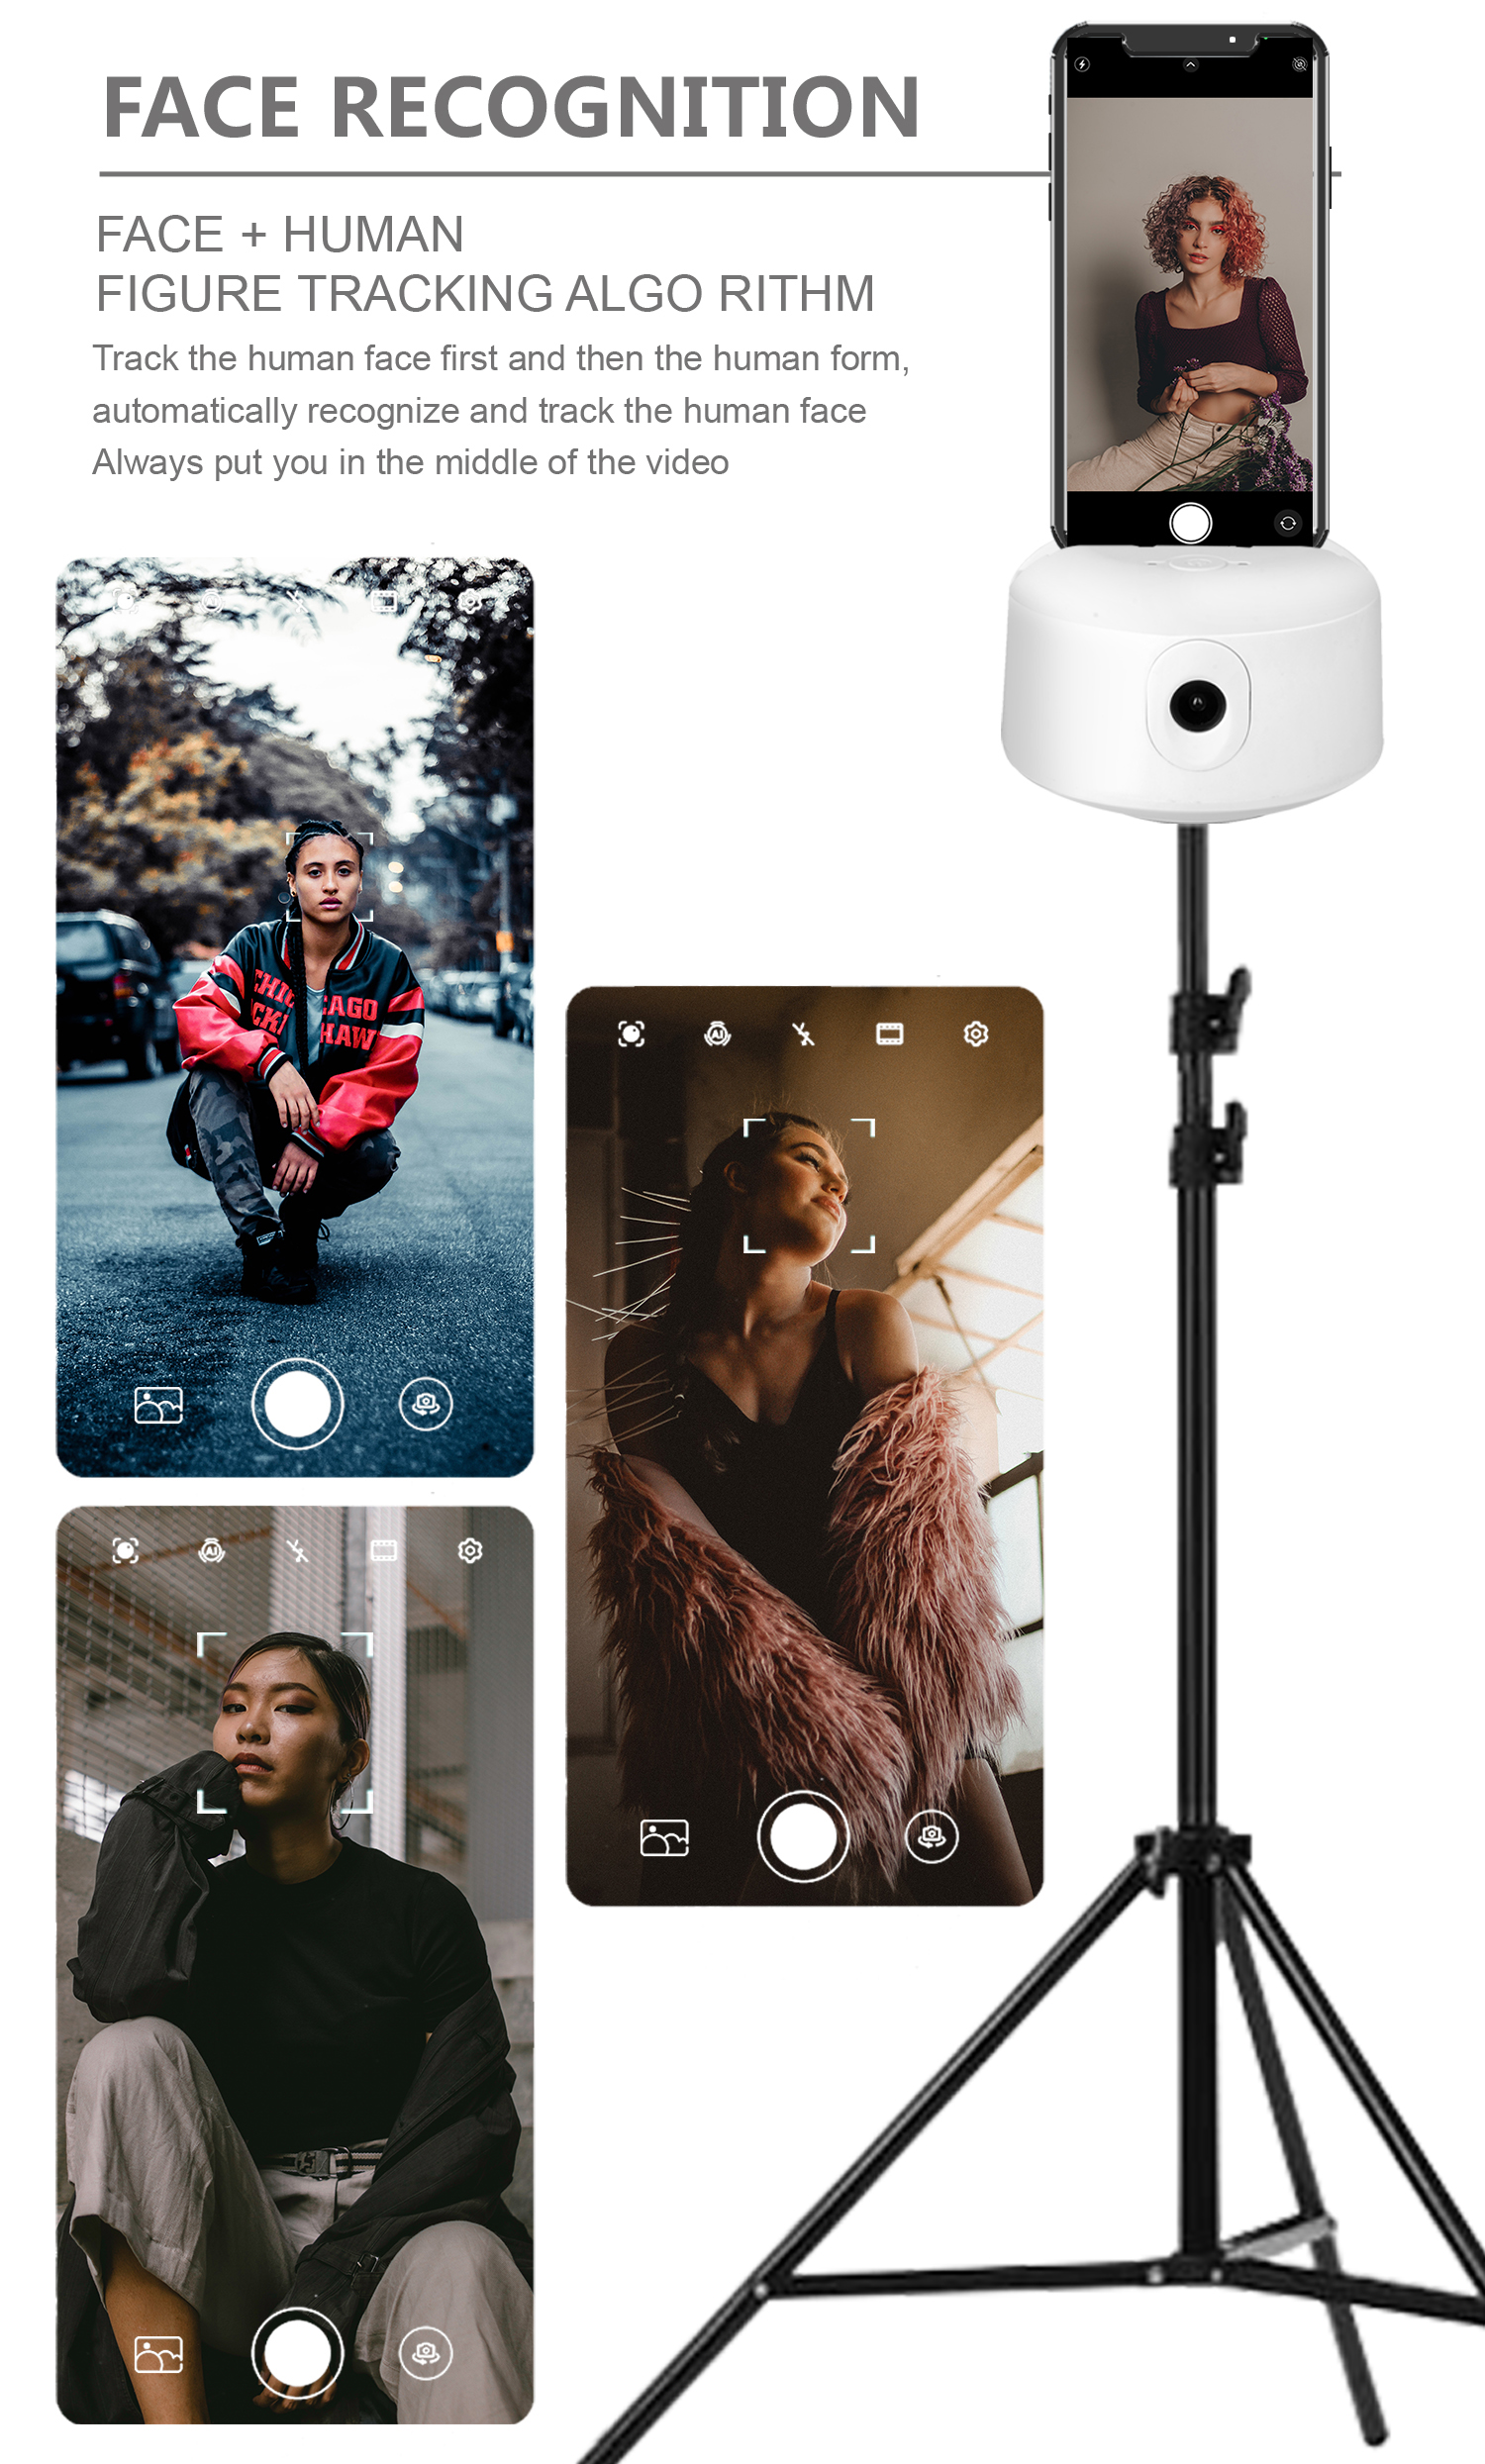 Like a cameraman! IMovie: Auto Tracking - Smart Shooting - 360 ° Rotation - Face Recognition - Video Call - Multistreamlive - Quick Create Mode - Remote Control - No need to install the app.